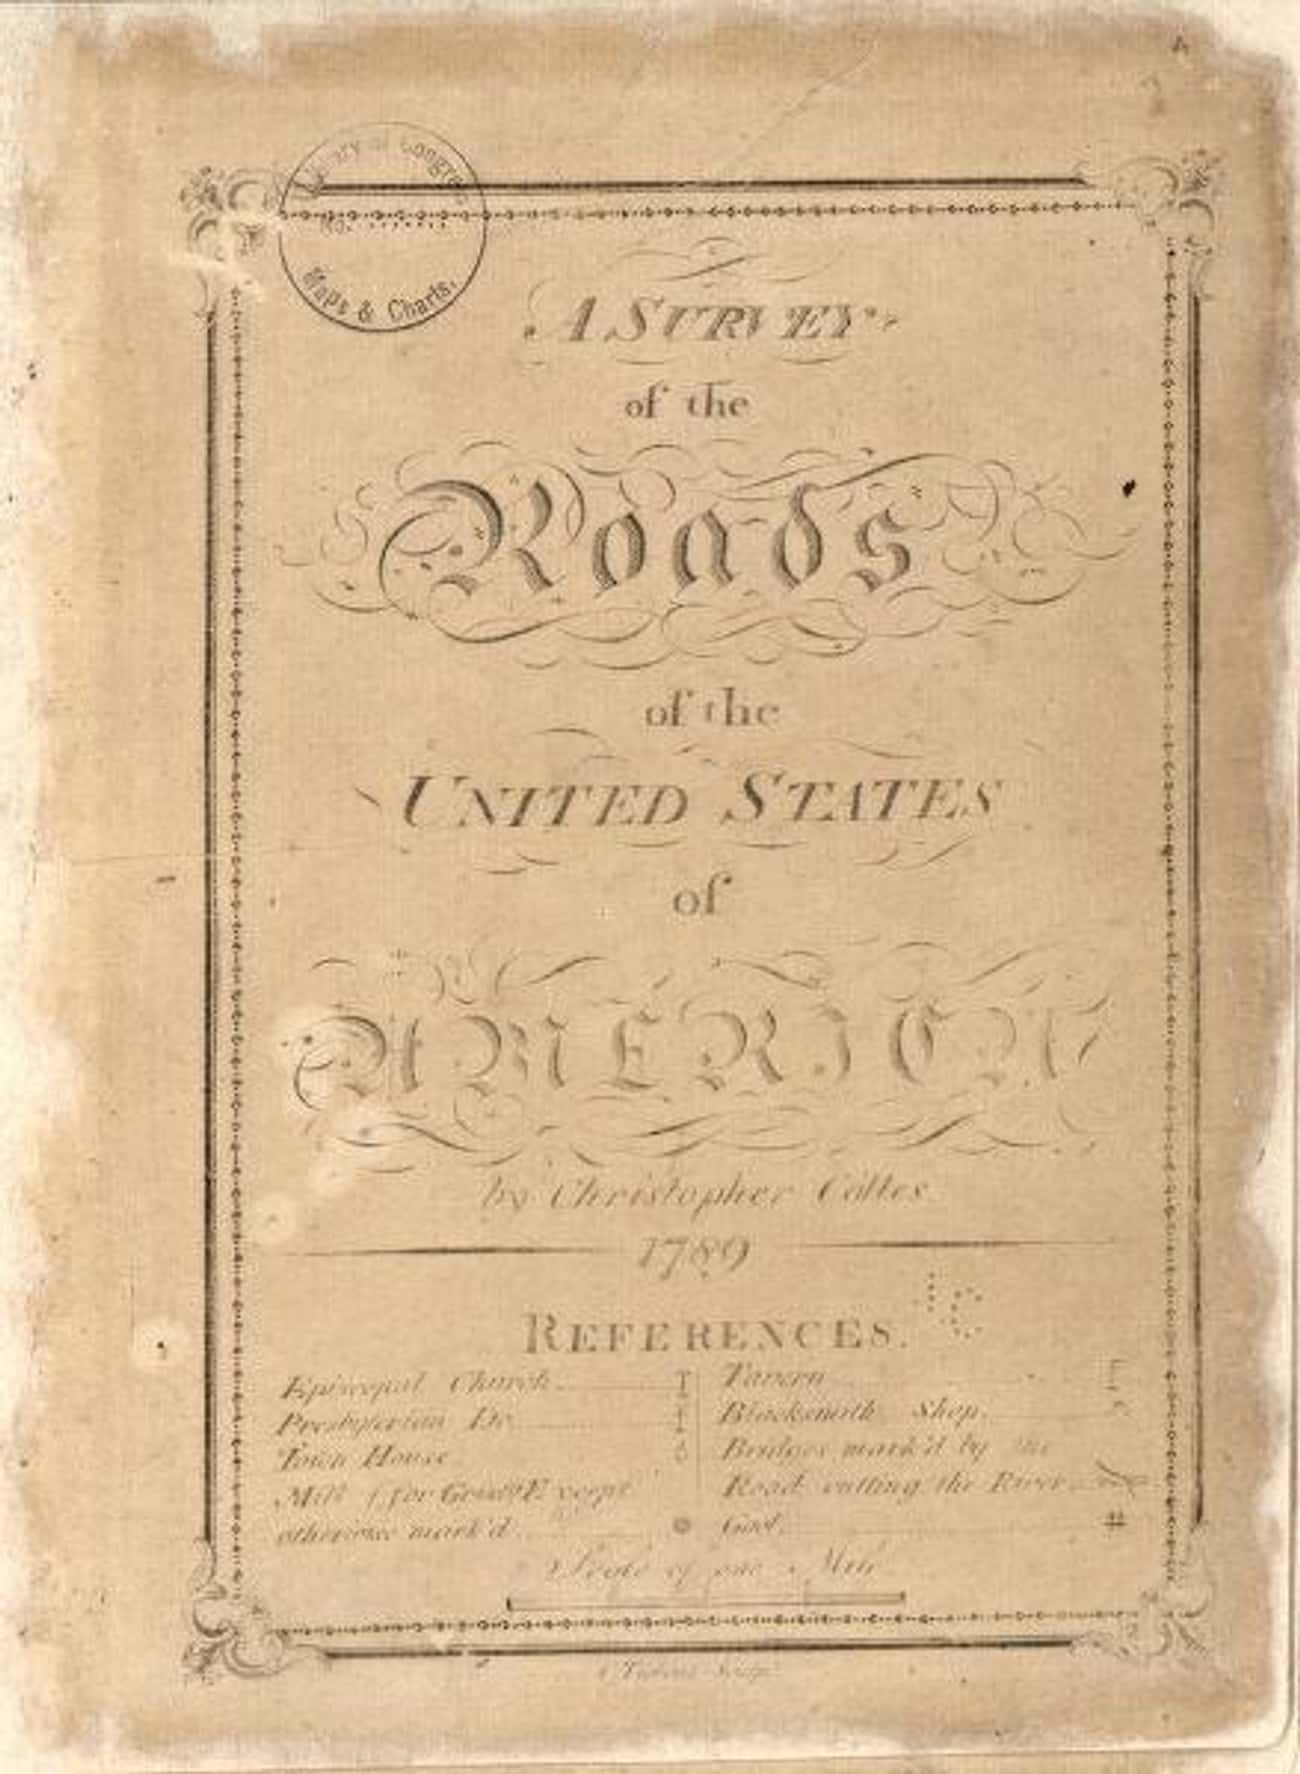 The First Road Map/Guide Book Of The U.S.